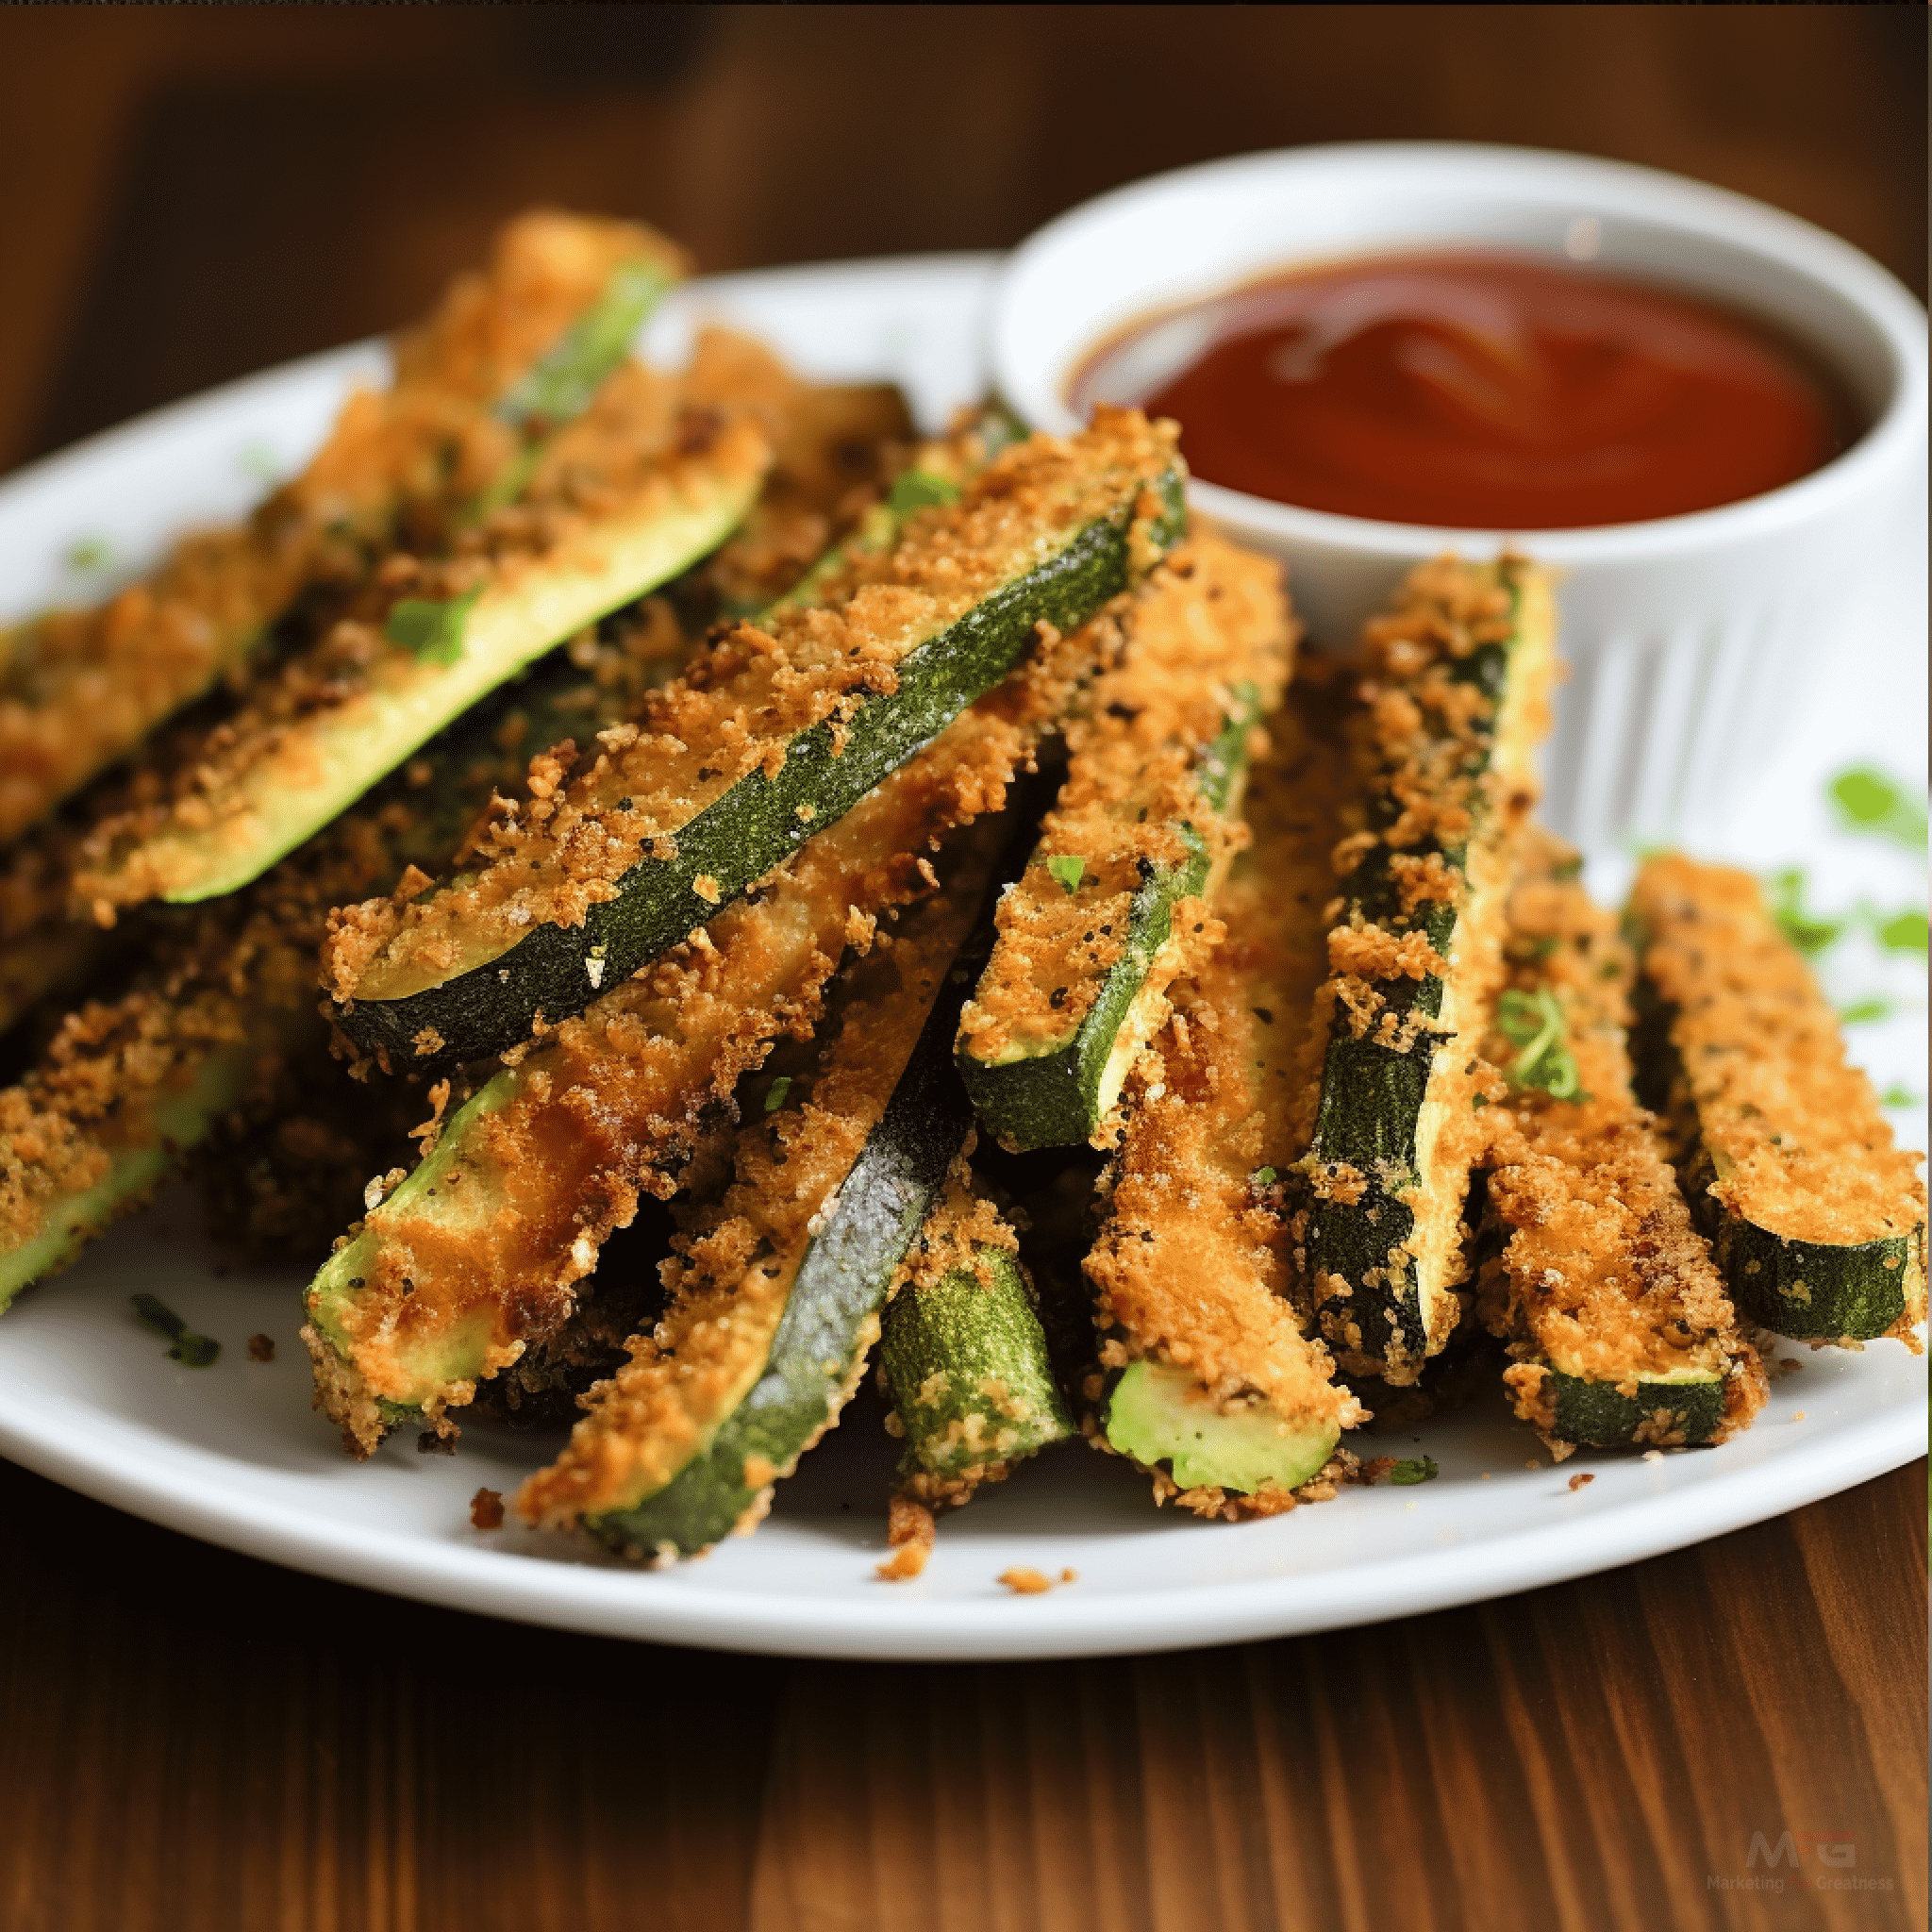 Zucchini fries: Coated in breadcrumbs and baked, zucchini fries provide a low-carb alternative packed with vitamins and minerals.